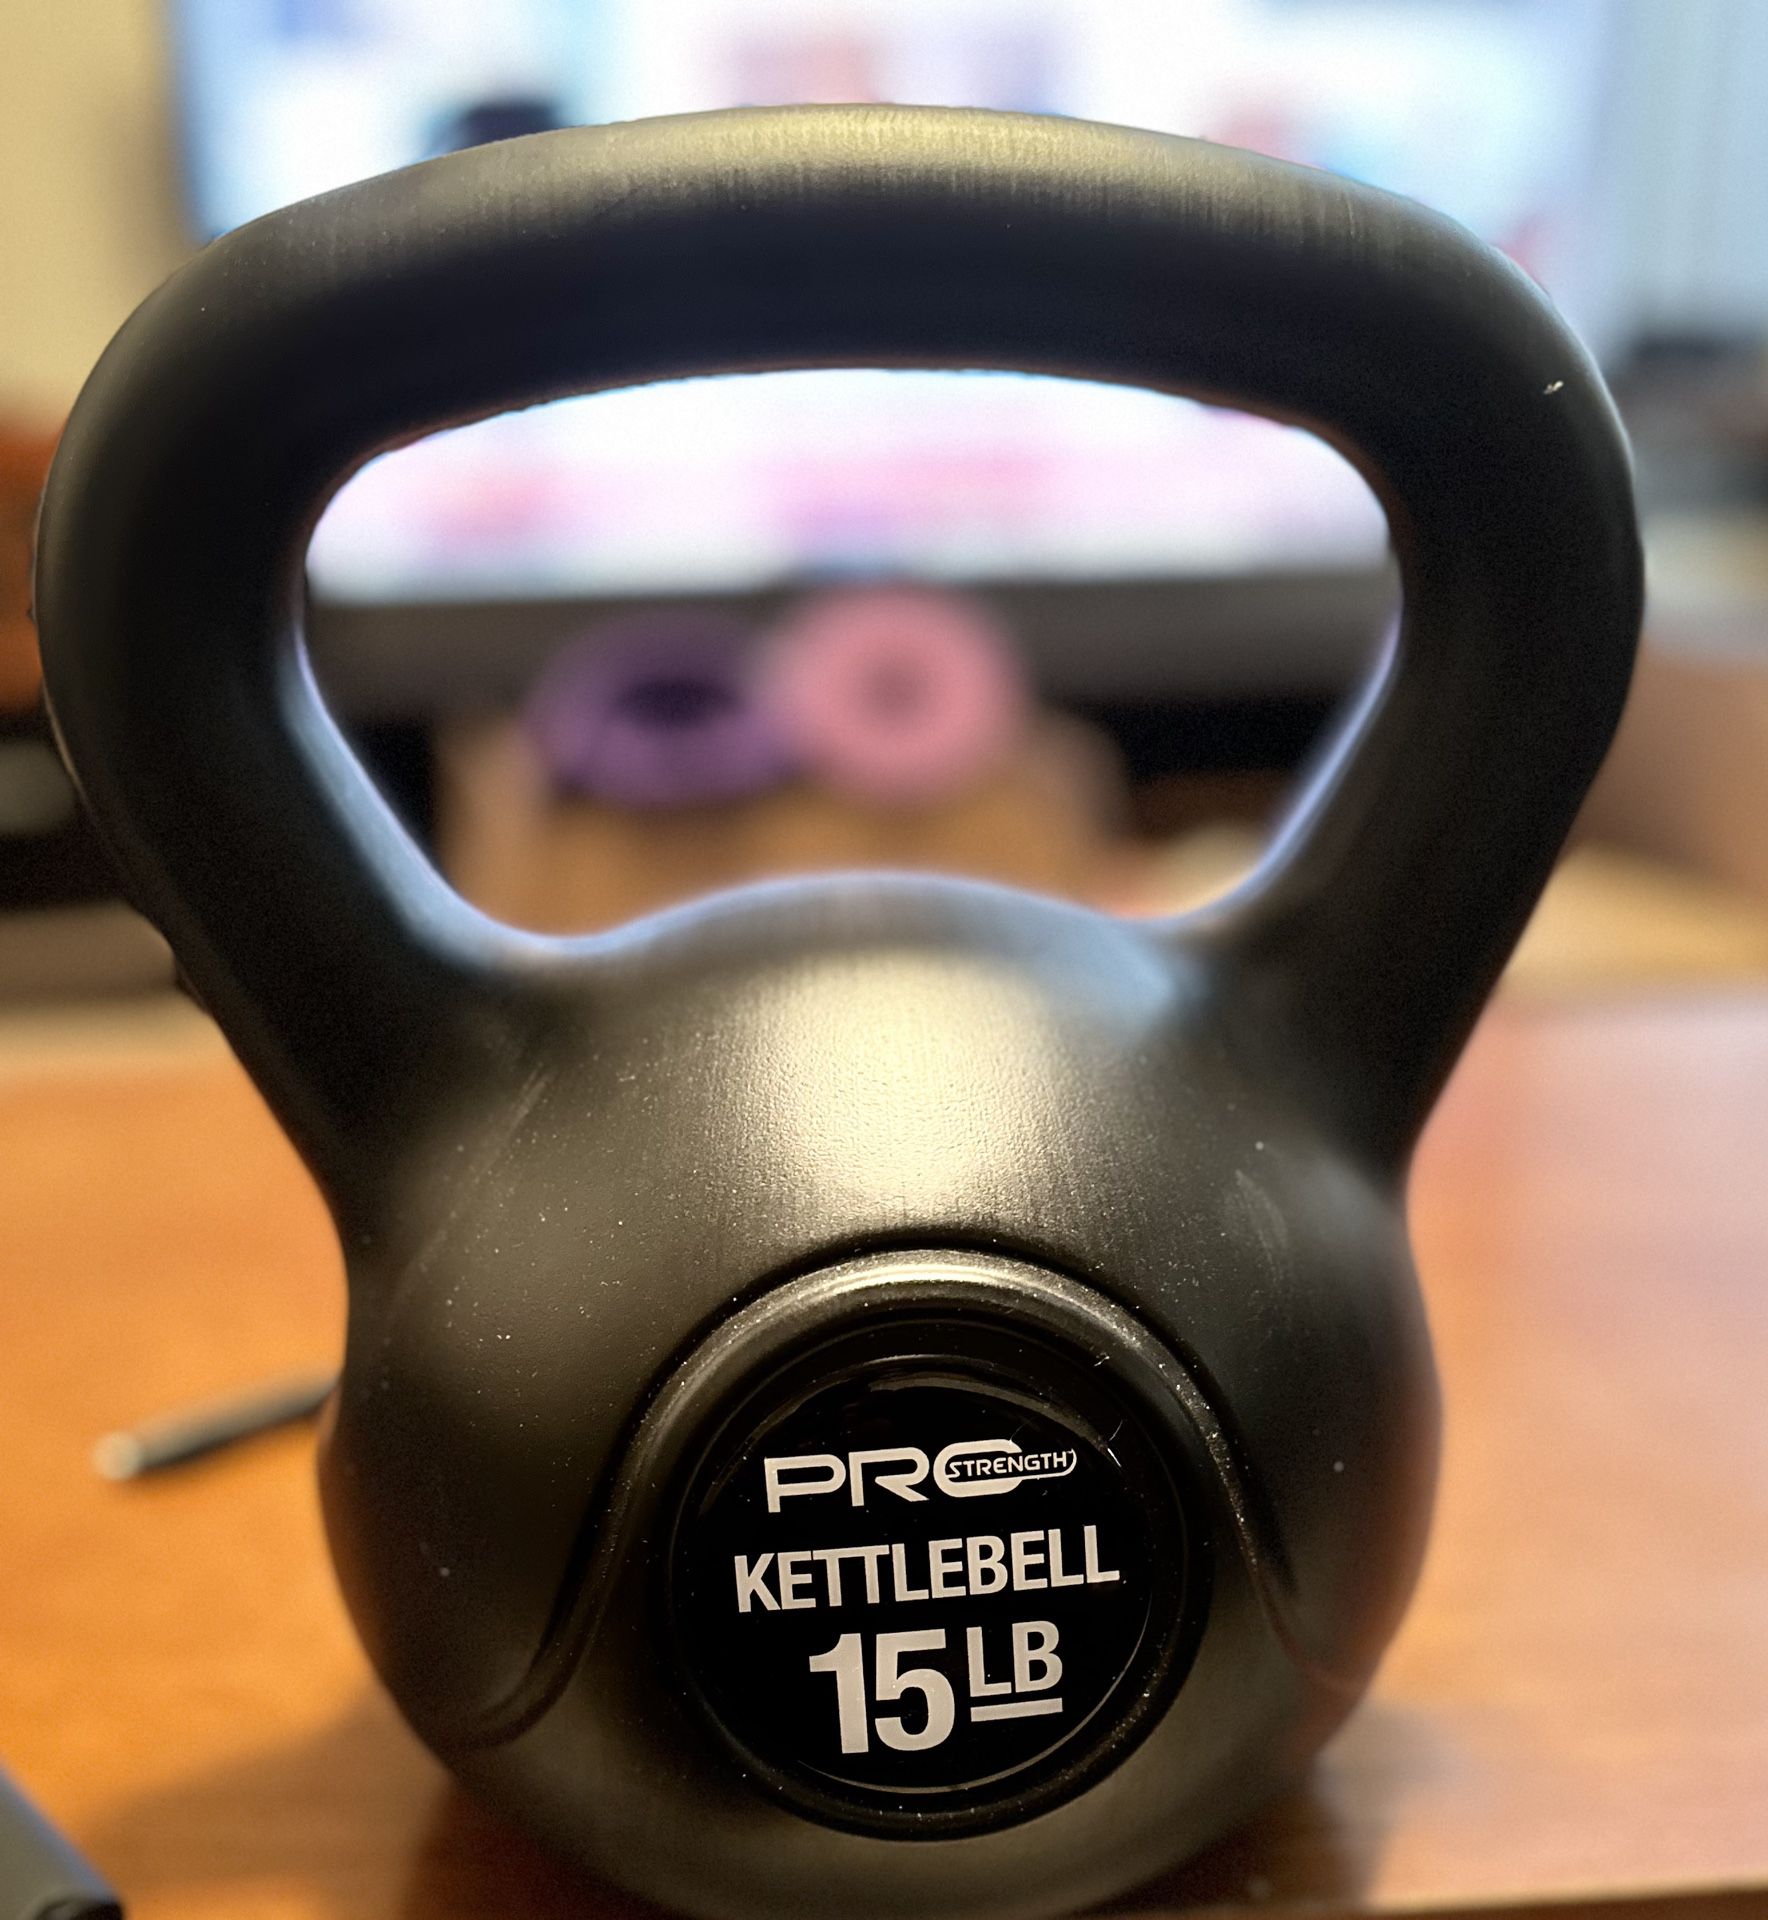 PRO KETTLEBELL Exercise Weight - 15 Lbs